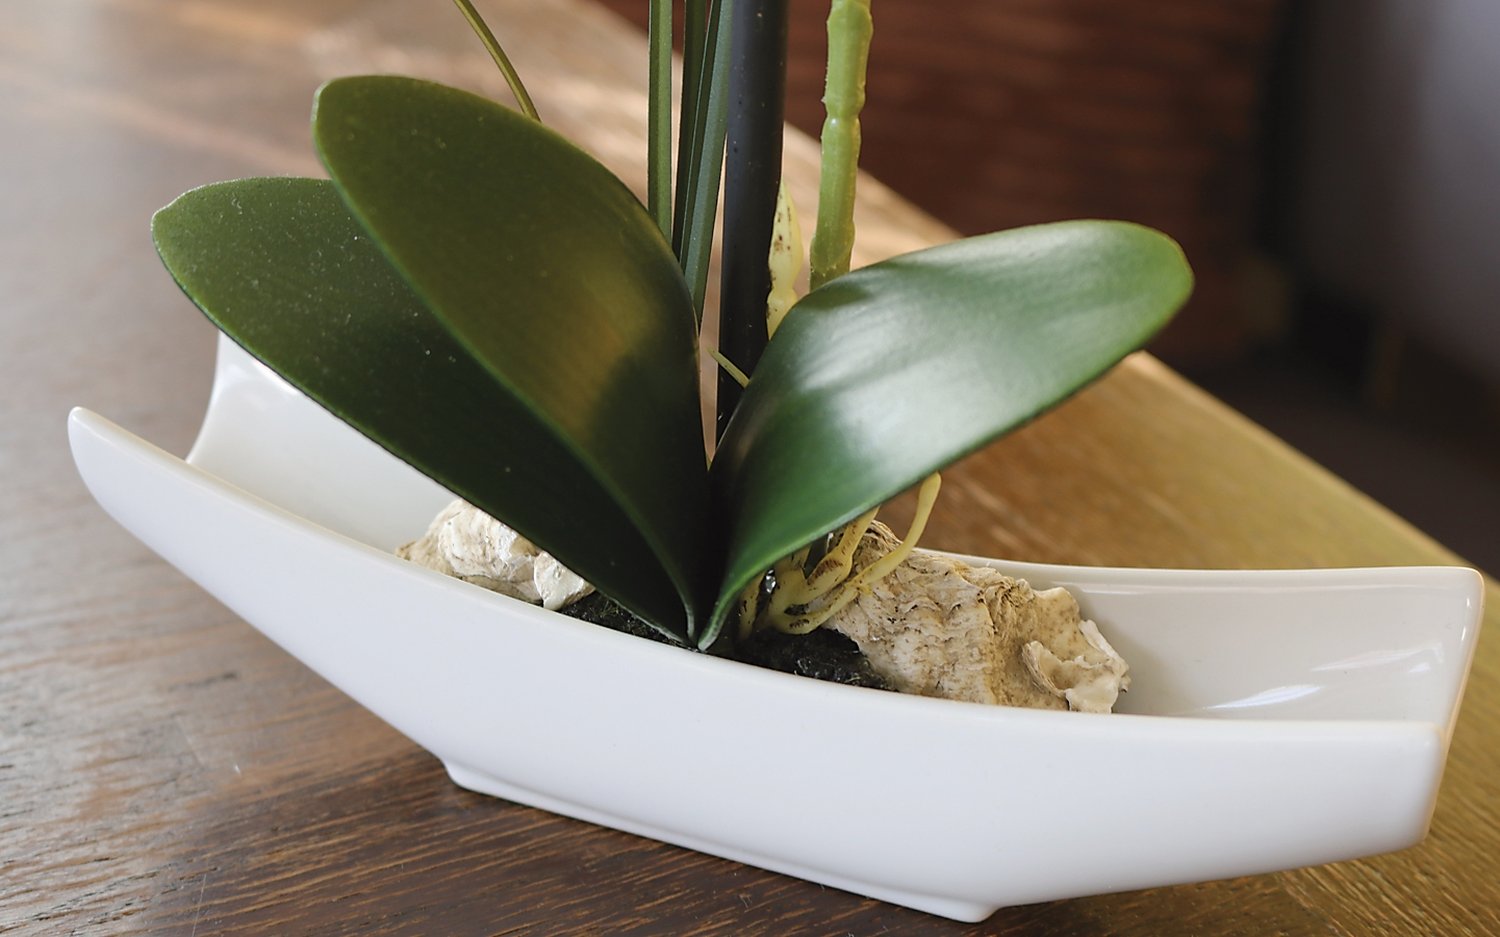 Plastic orchid Phalaenopsis in bowl, 30 cm, real touch soft, beige-white